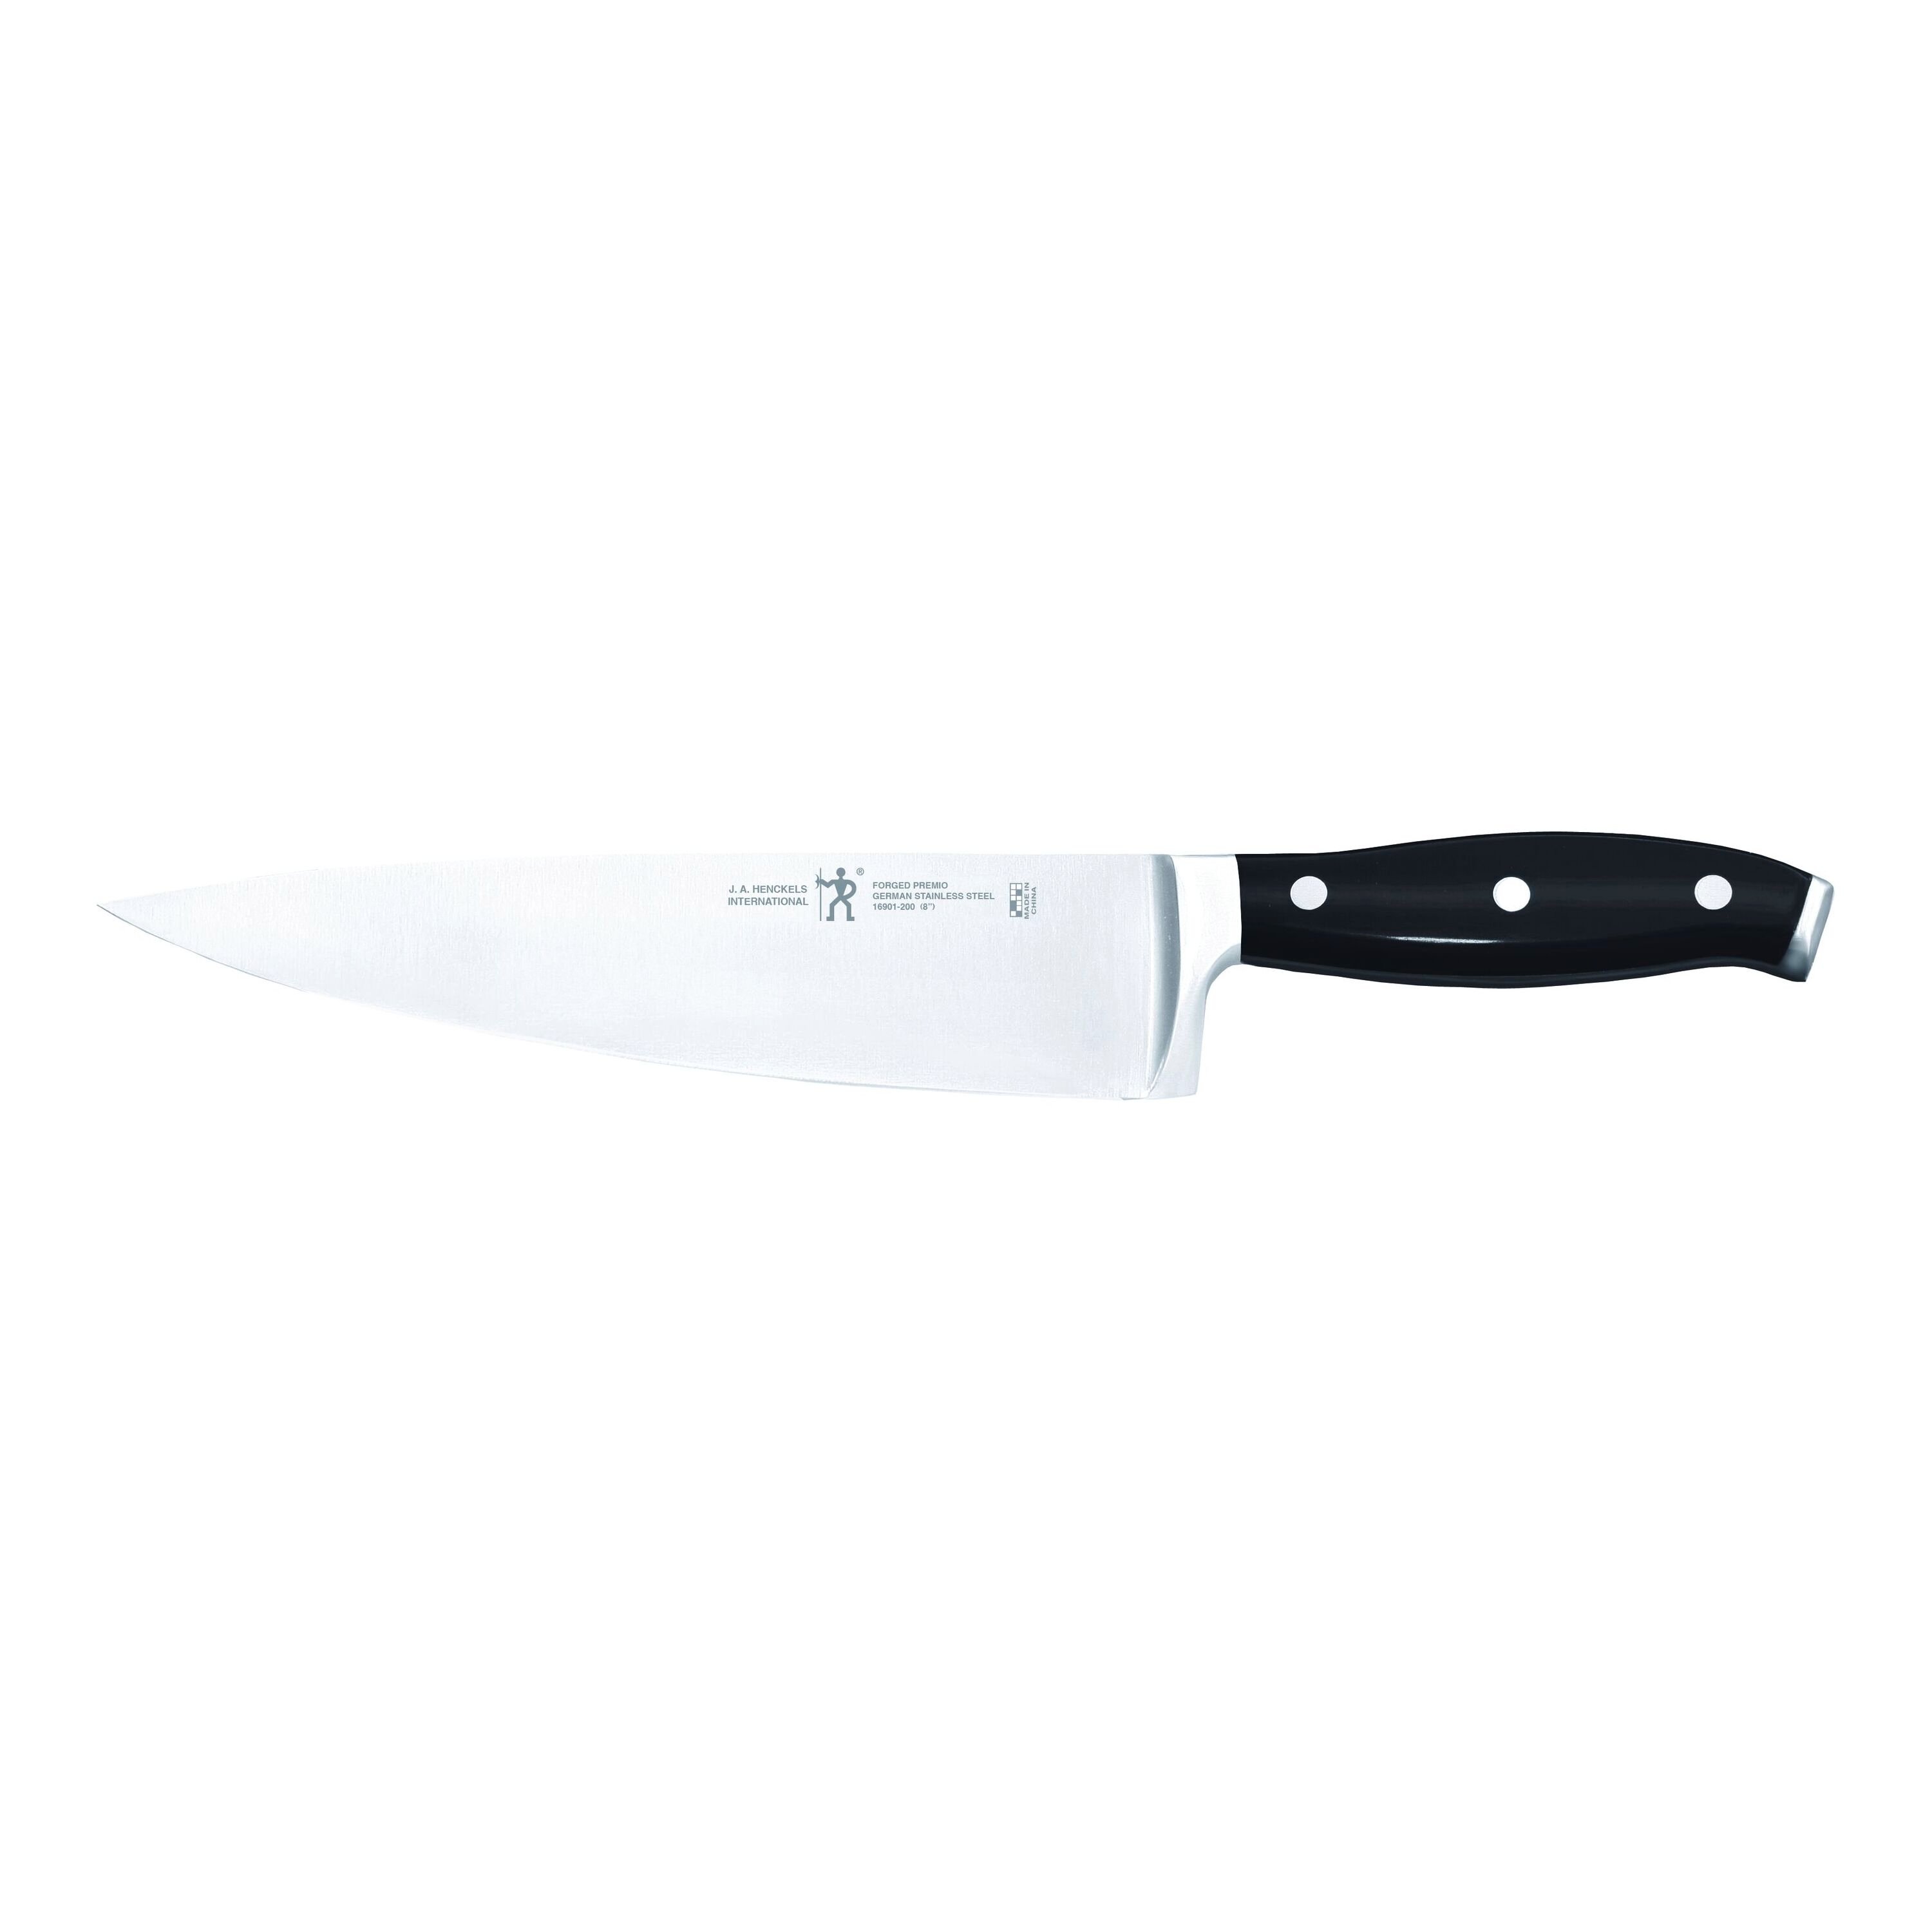 8-Inch Chef Knives High Carbon German Forged Steel Kitchen Knife